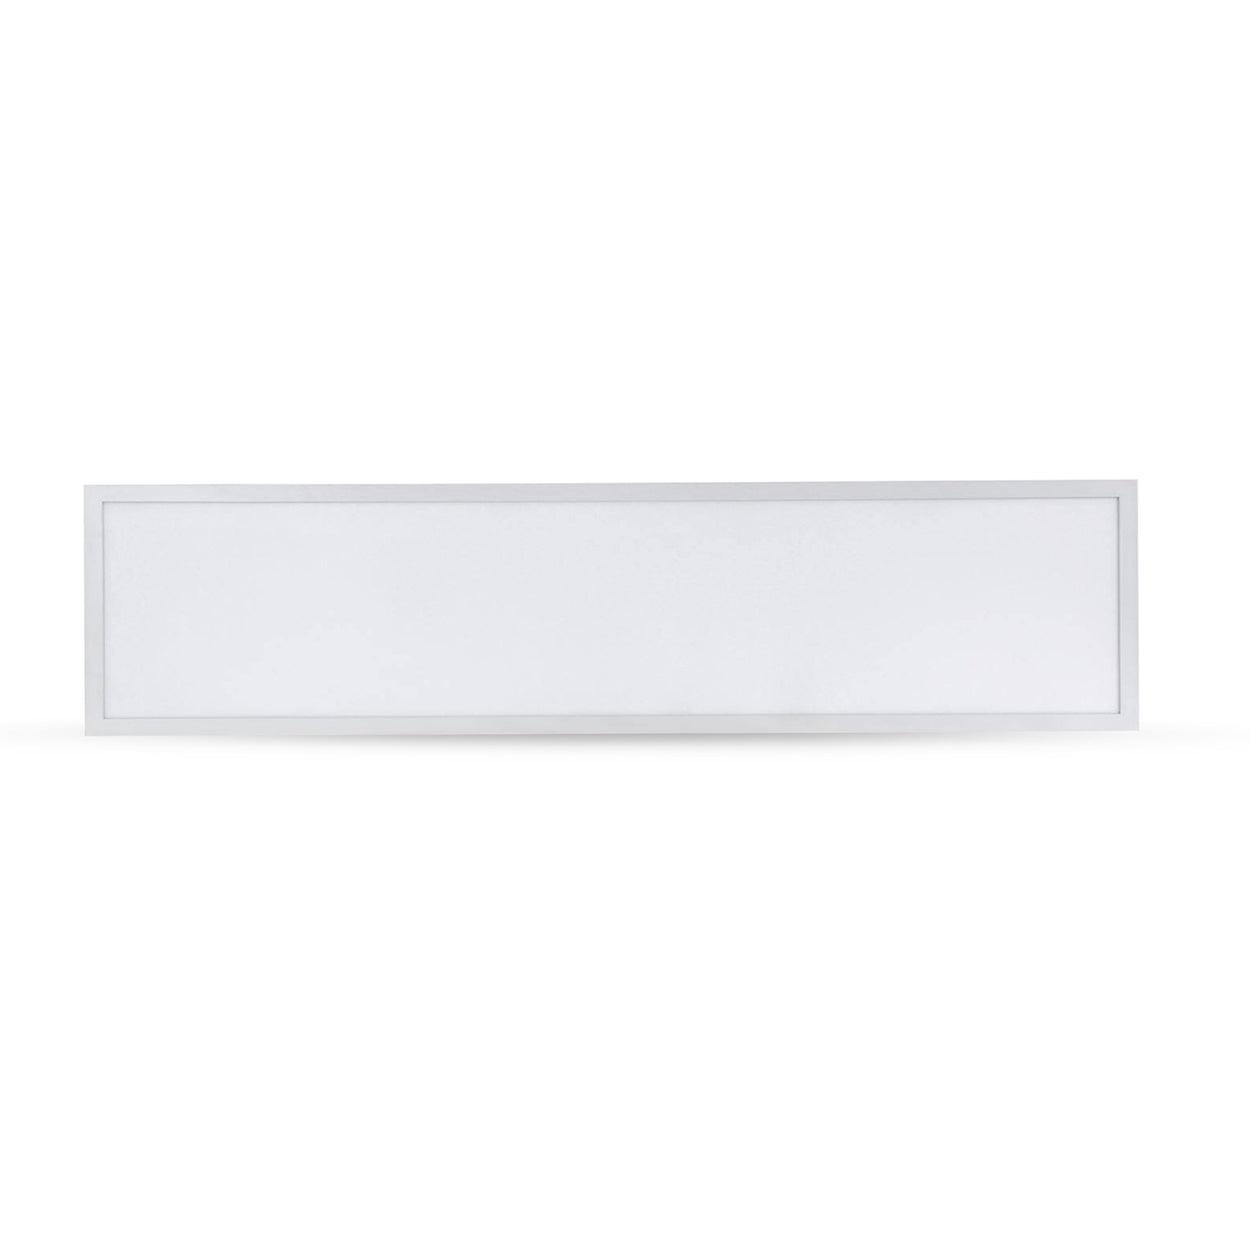 ANKUR 4 FEET SLIM LED PANEL LIGHT at the lowest price in India.